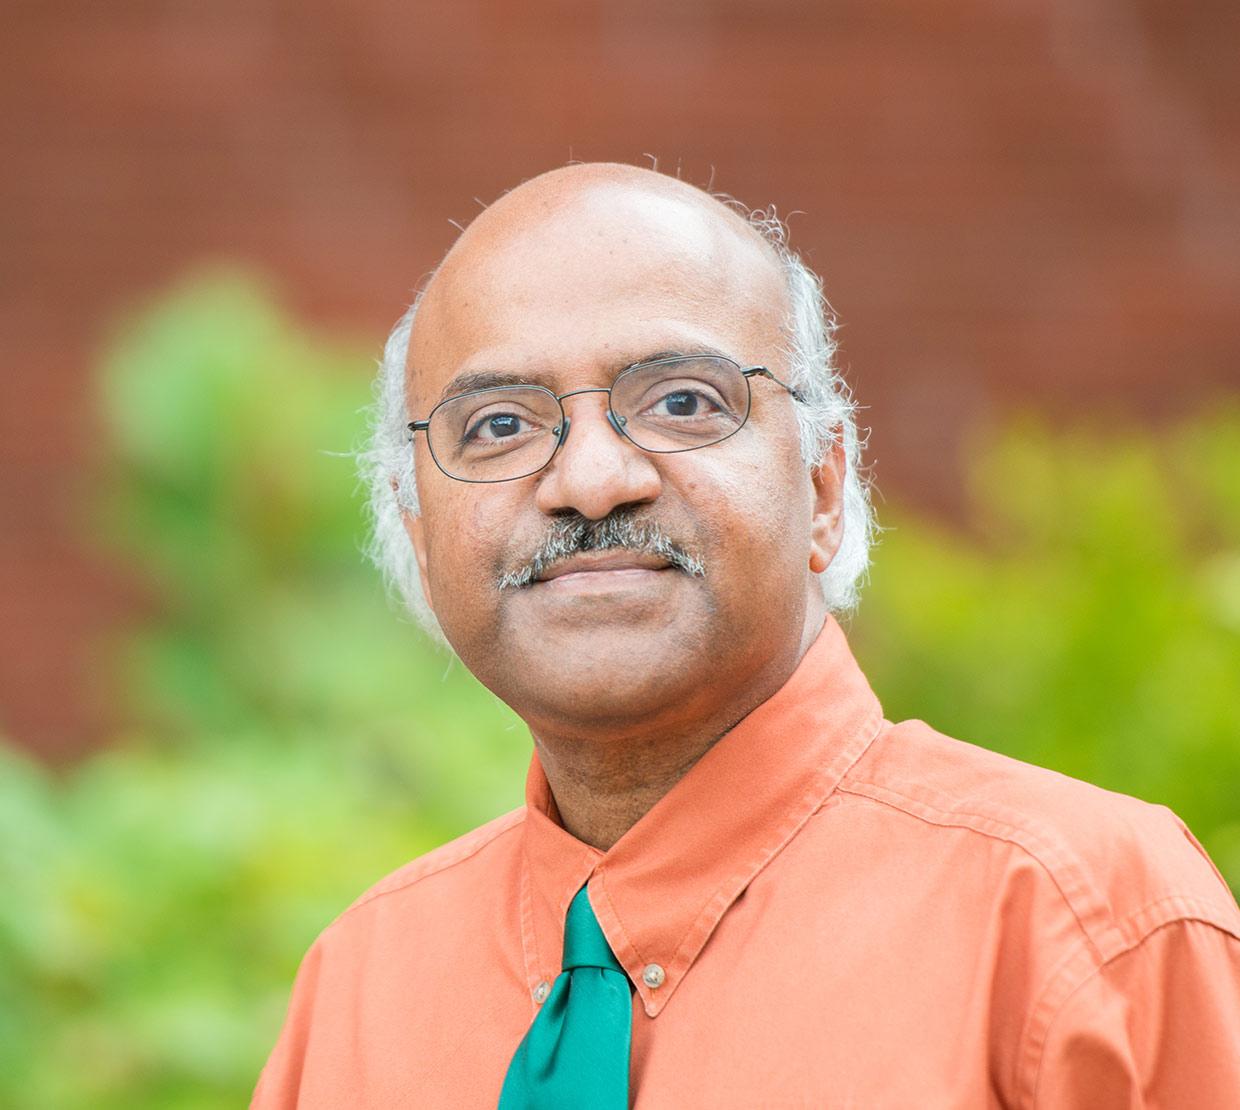 Sastry Pantula standing in front of shrubbery and brick wall